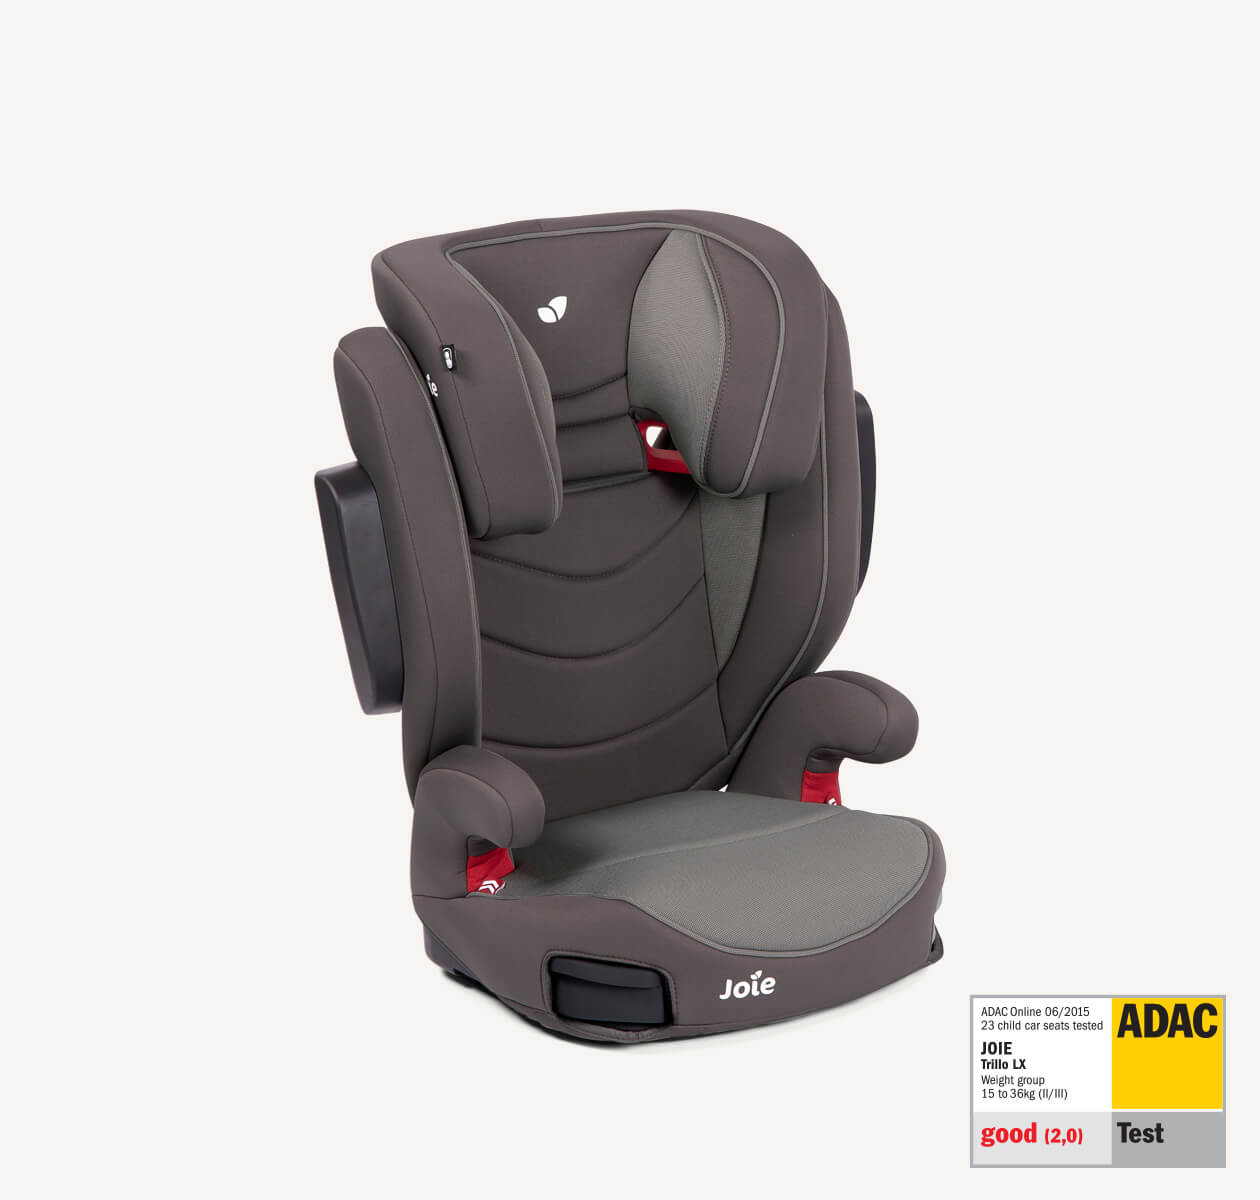  Joie trillo lx belted booster seat in dark gray positioned at a right angle, with the ADAC test label in the lower right corner.